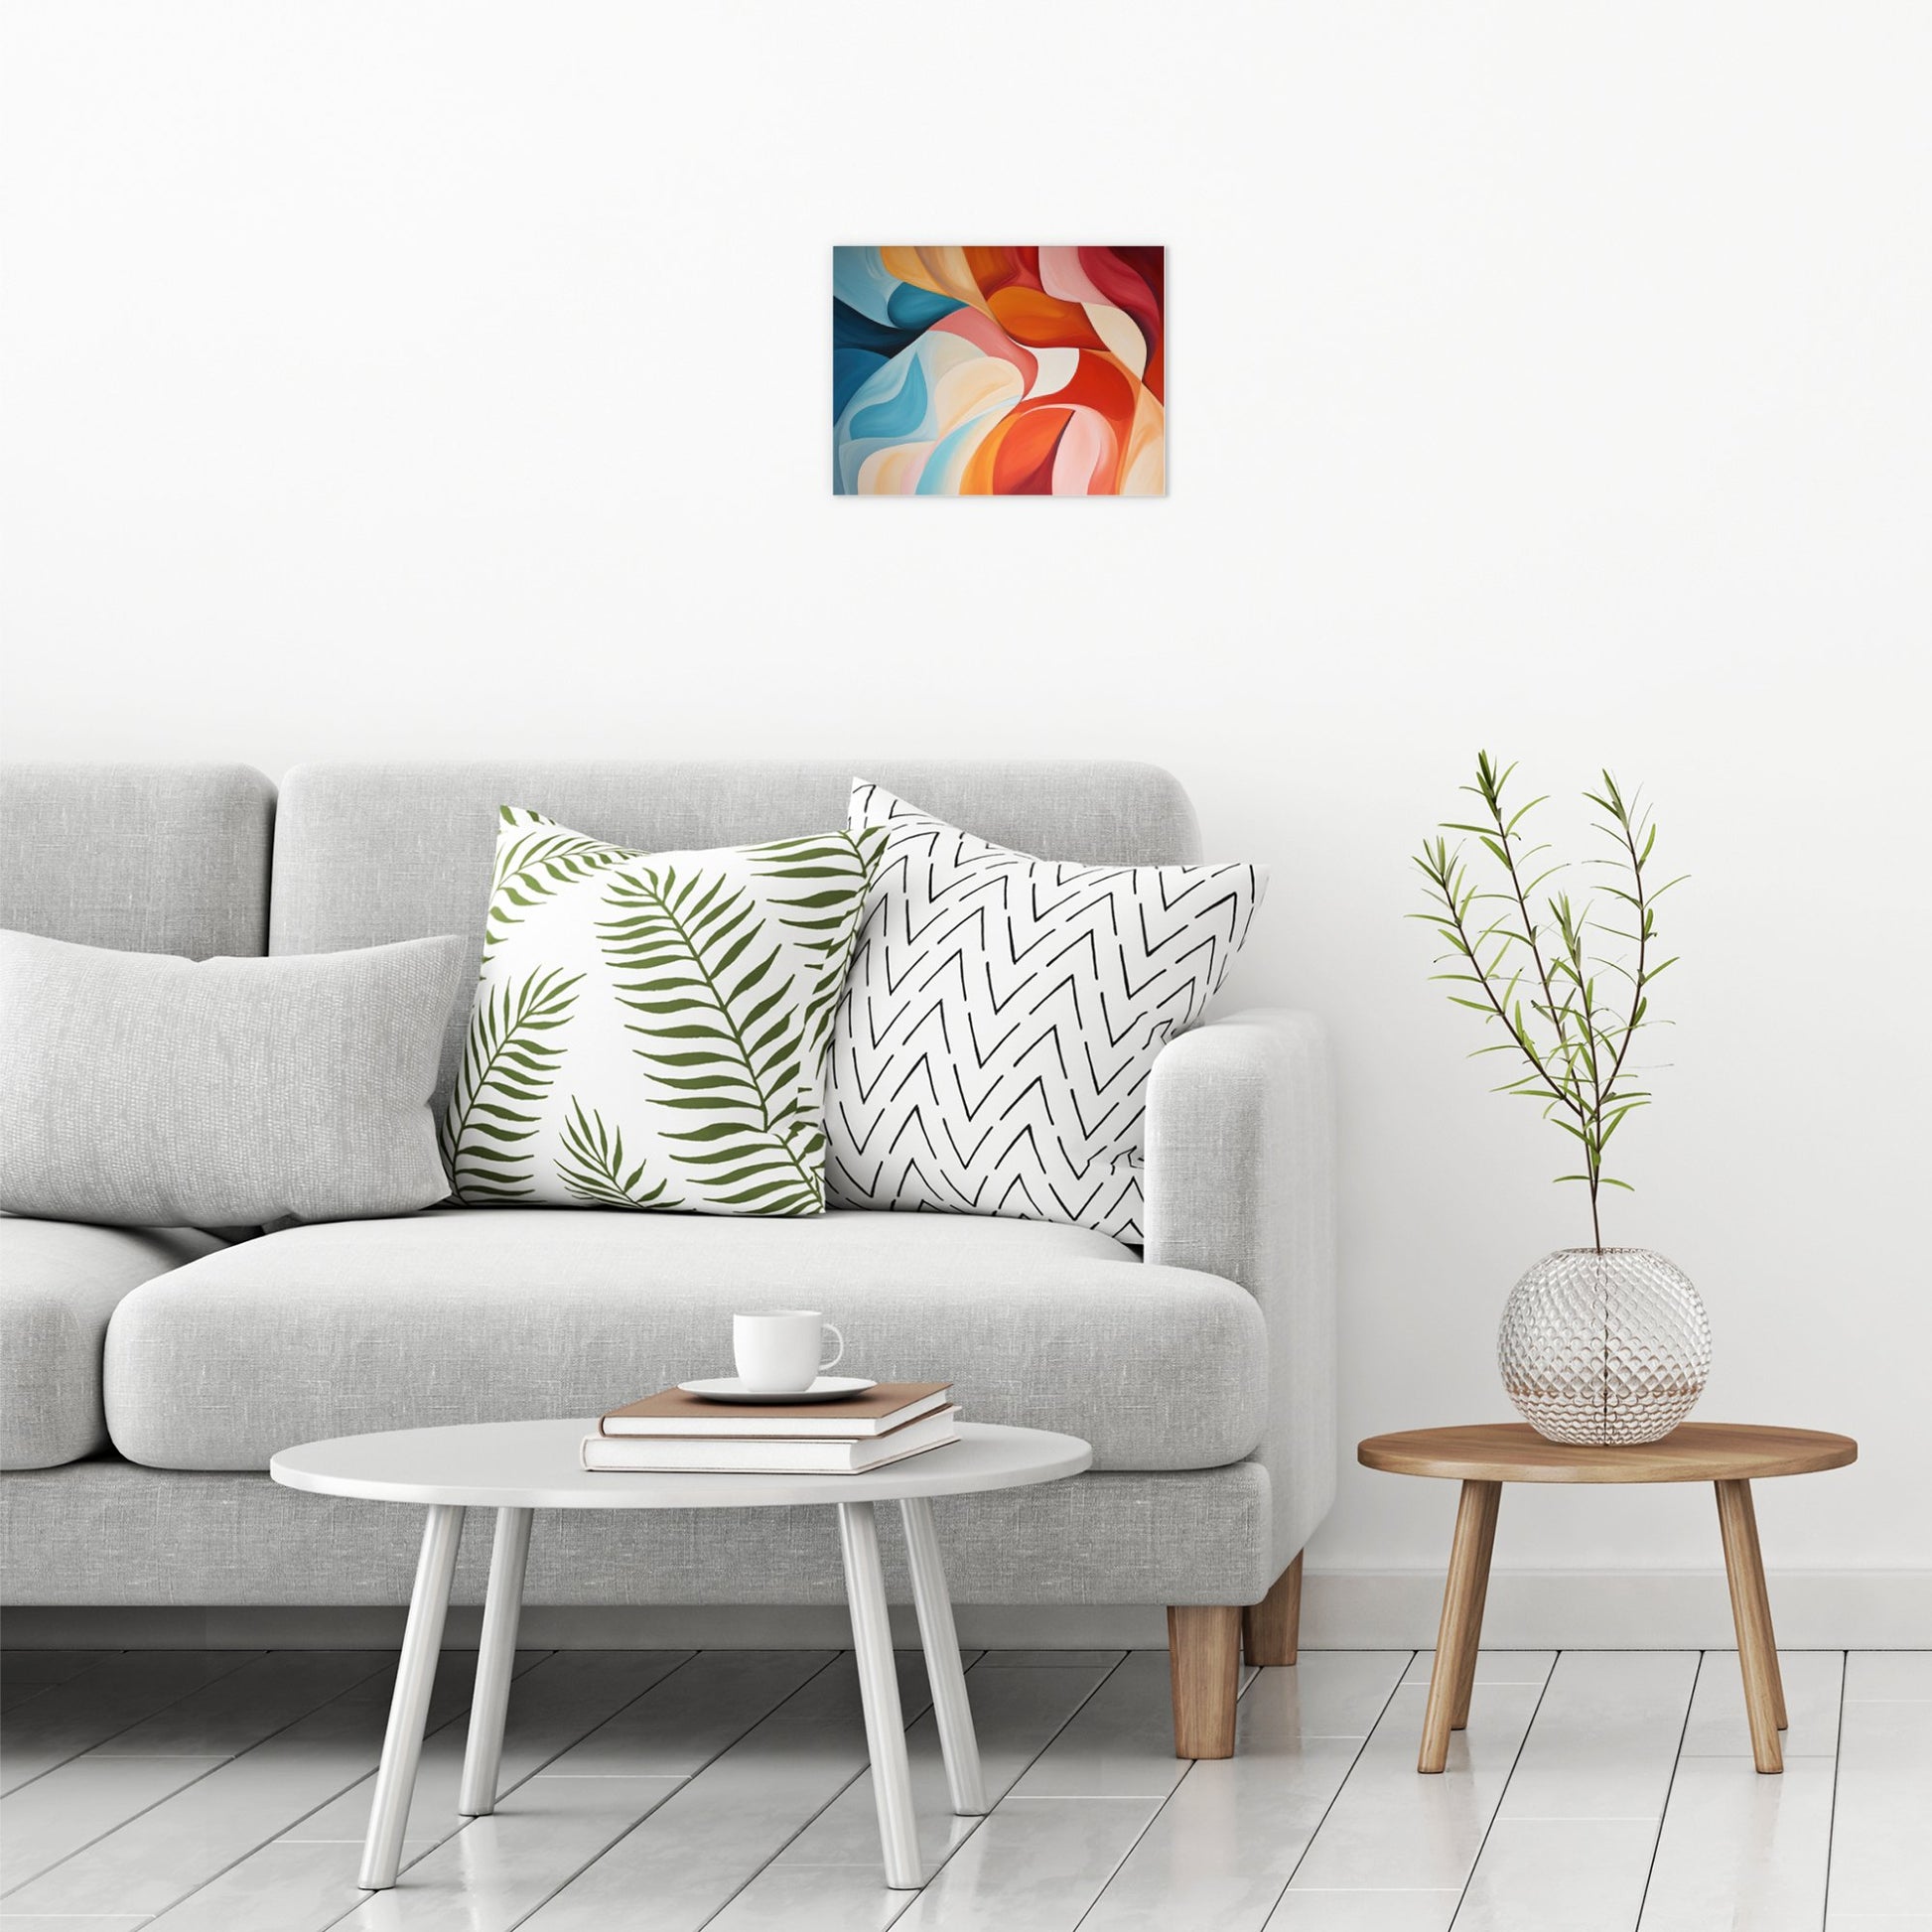 A contemporary modern room view showing a small size metal art poster display plate with printed design of a Turbulence Abstract Painting